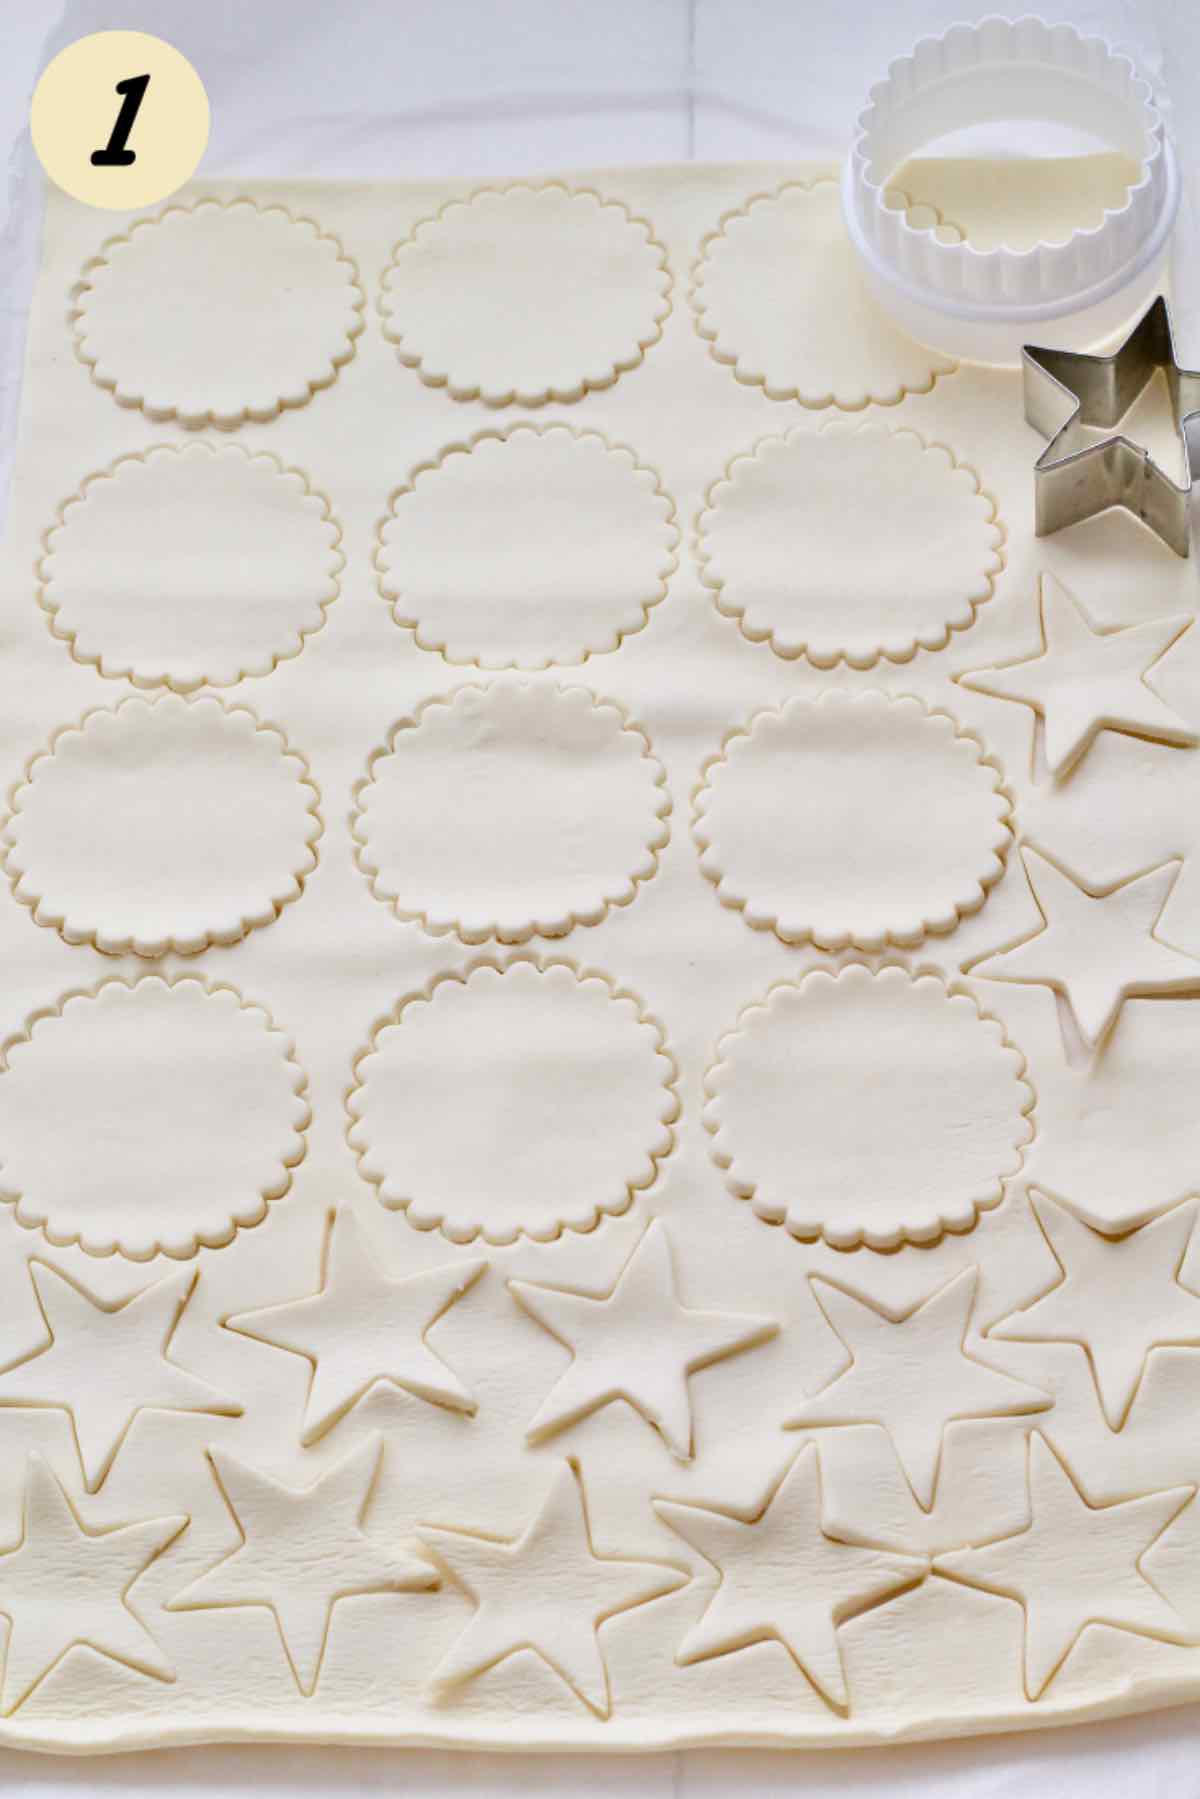 Puff pastry sheet with fluted circles and stars cut out.